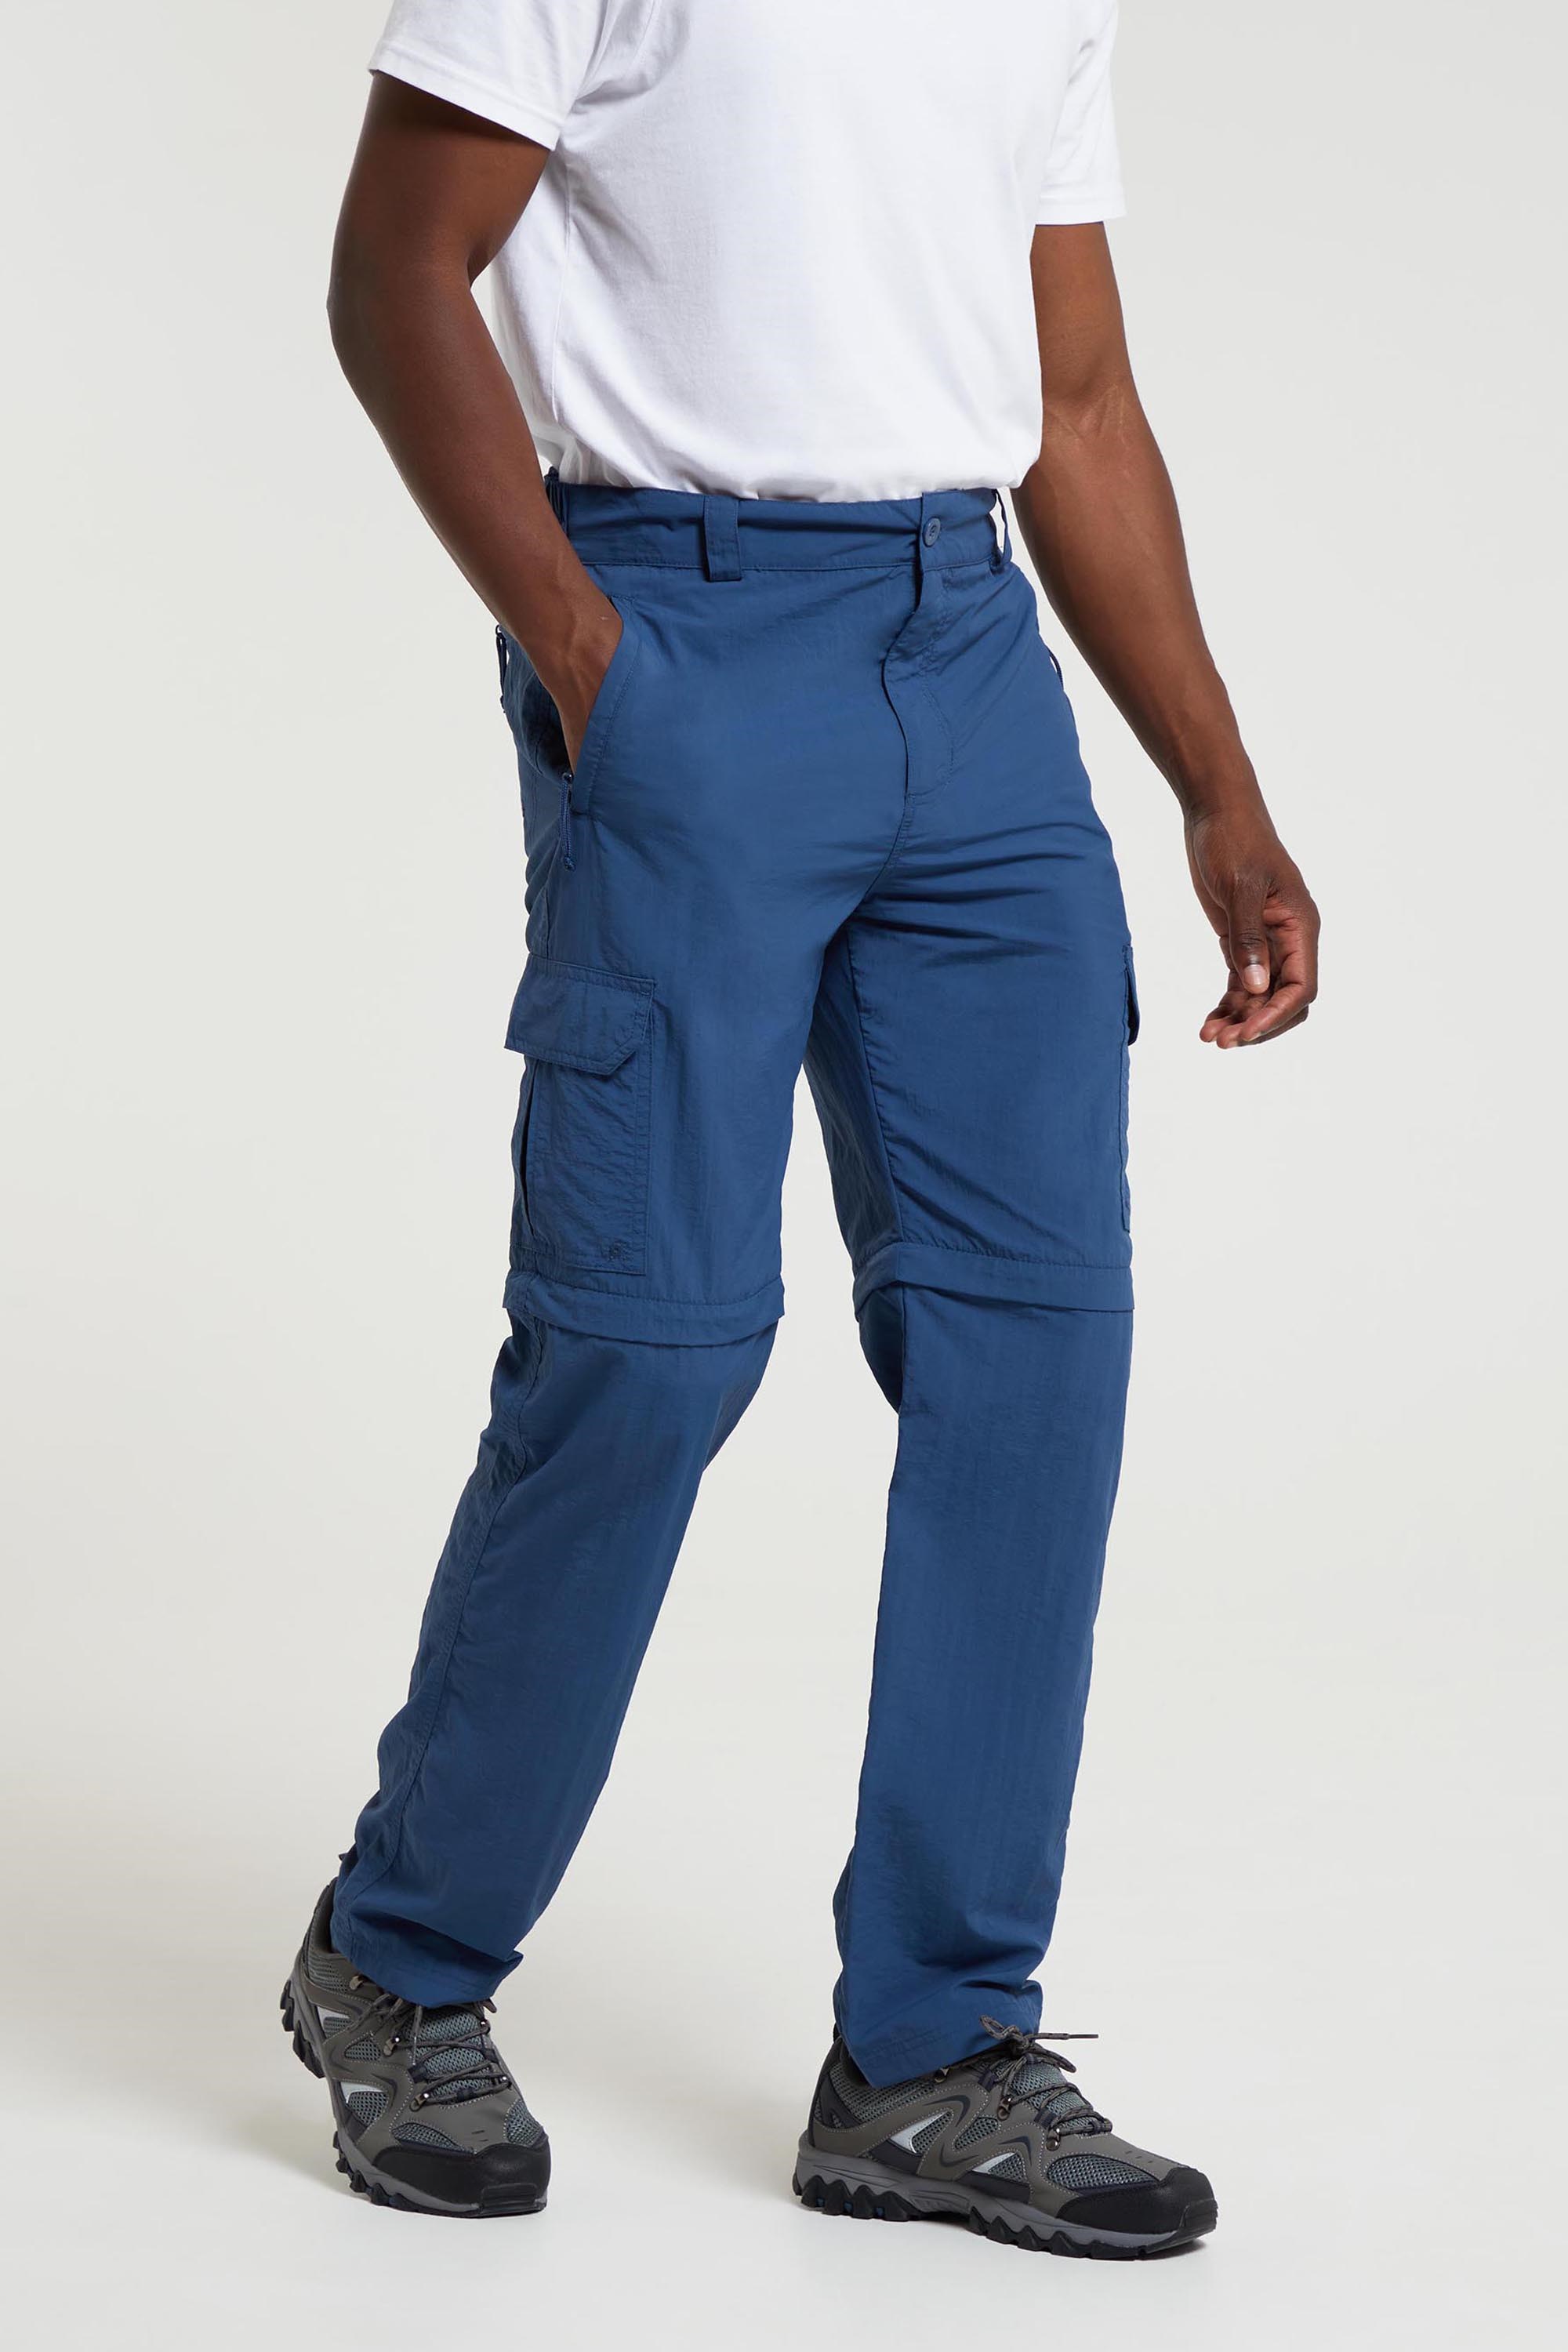 Front Double Zipper Straight Drawstring Casual Trousers Mens High Street  Style Streetwear Loose Cargo Pants268S From Mjuik, $43.66 | DHgate.Com